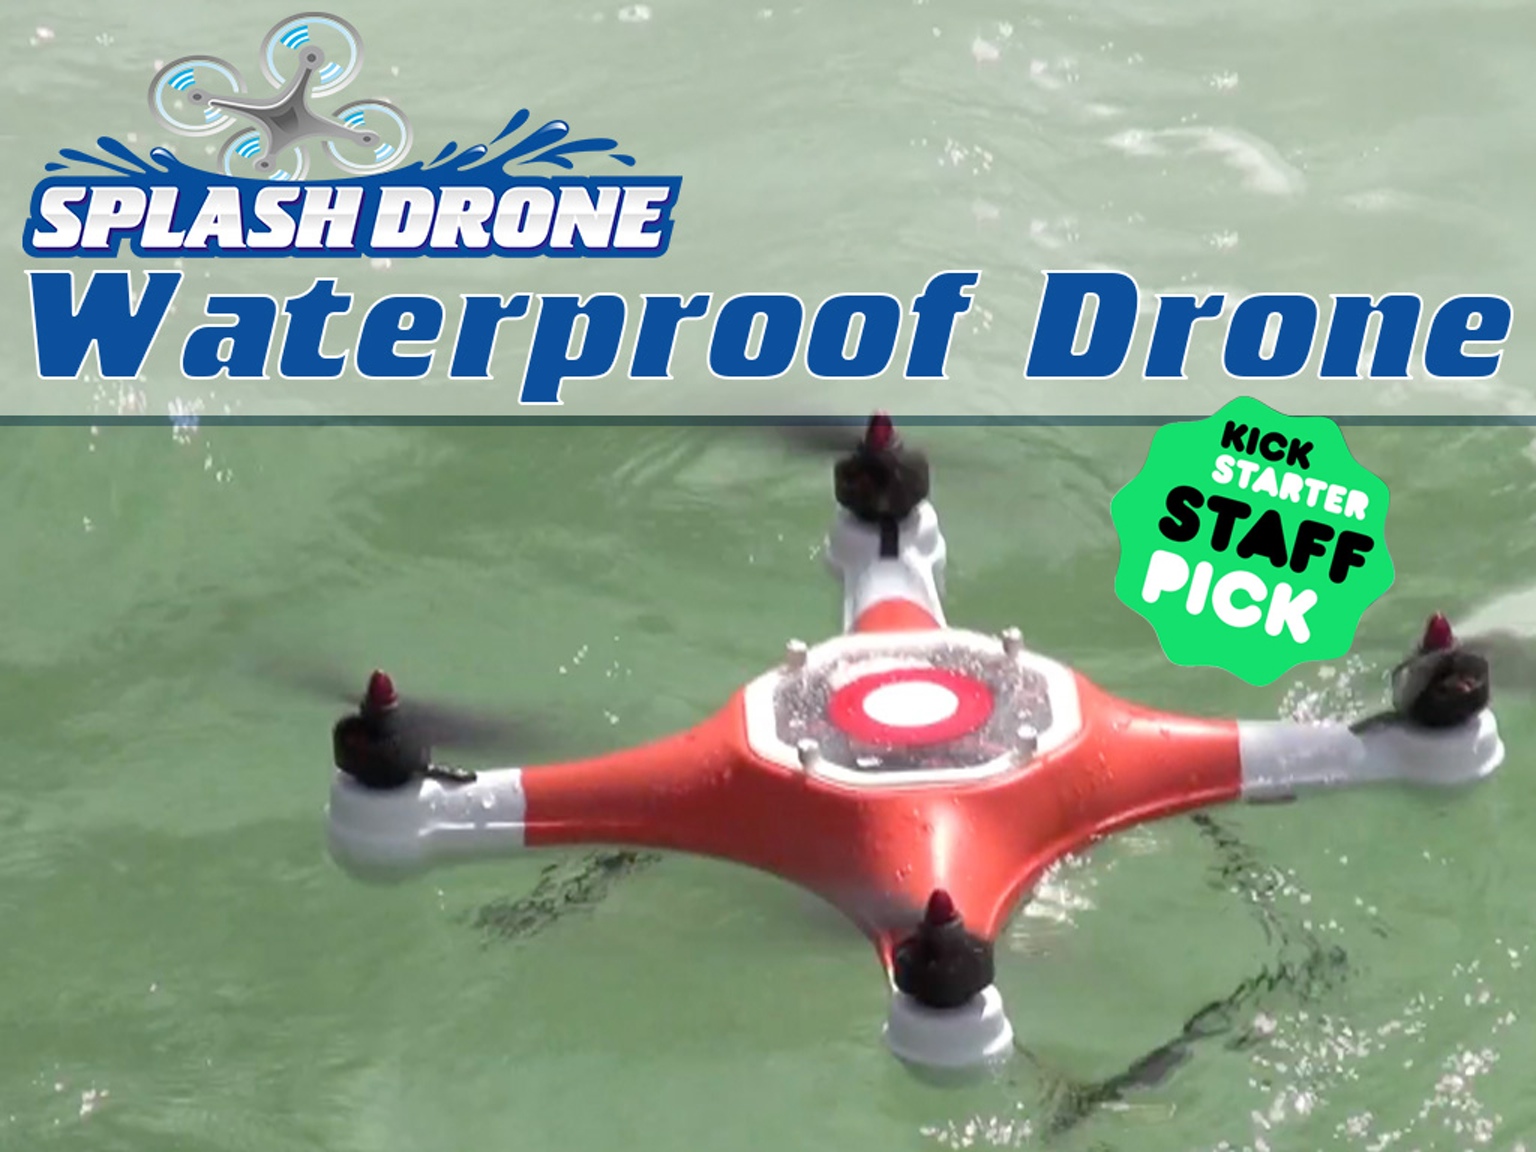 Splash Drone: The Waterproof Drone Everybody Wants to Own